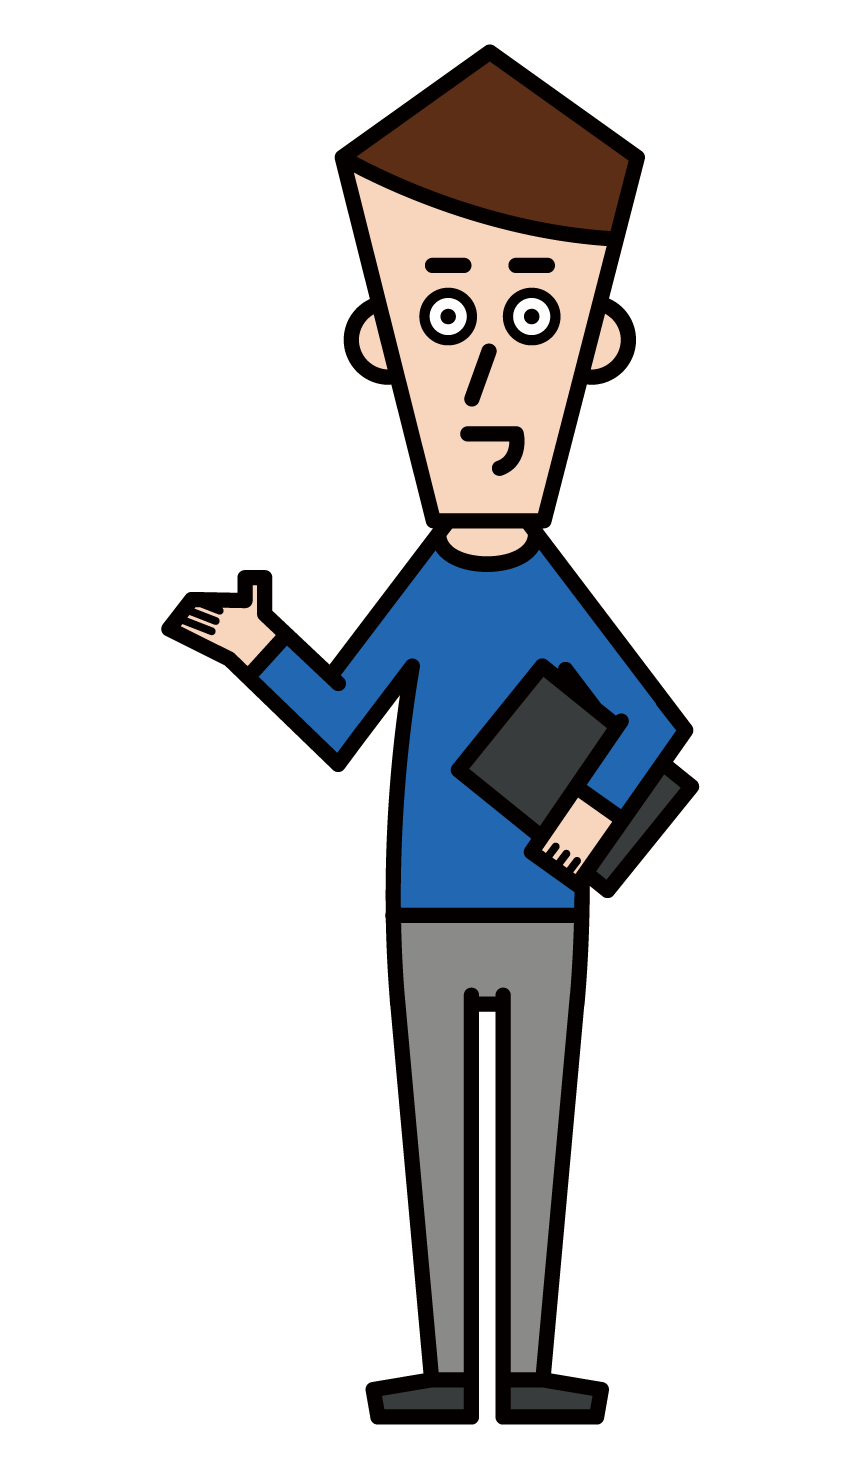 Illustration of a man in plain clothes and office casual